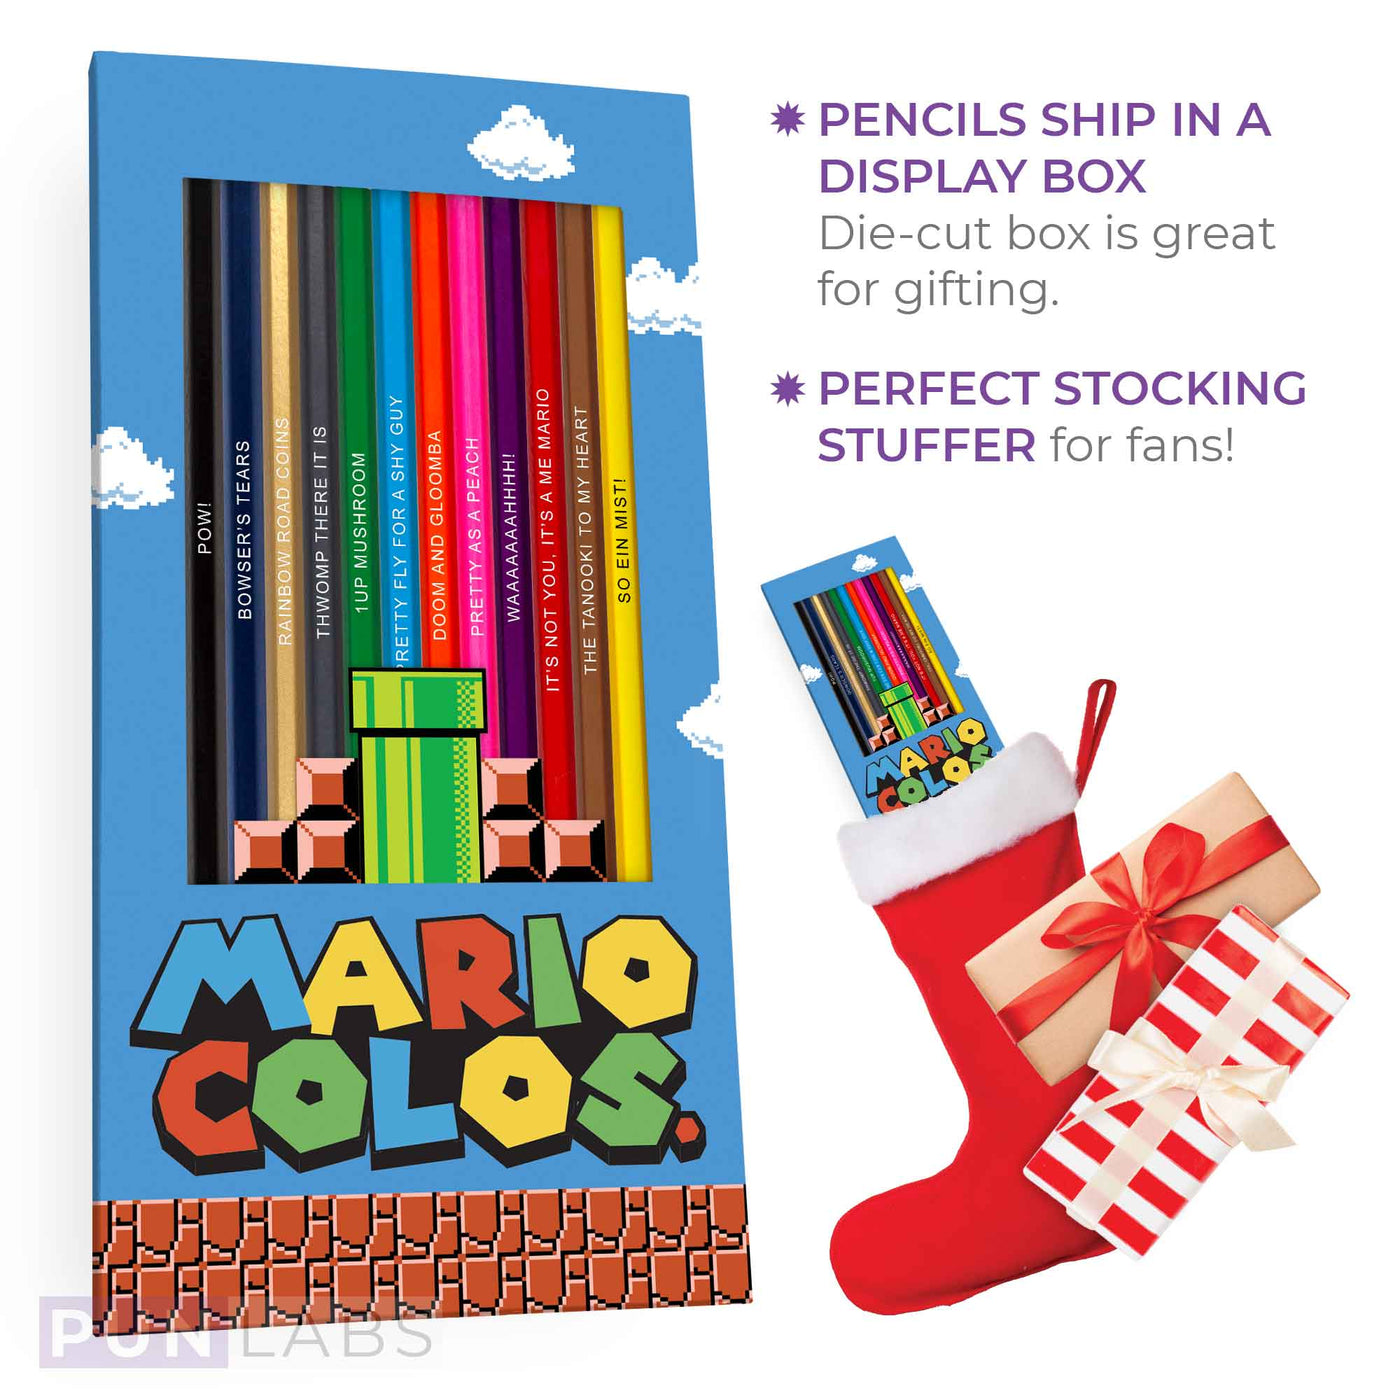 Mario Colos. Colored Pencils Display, Great Stocking Stuffer For Fans of Super Mario Brothers